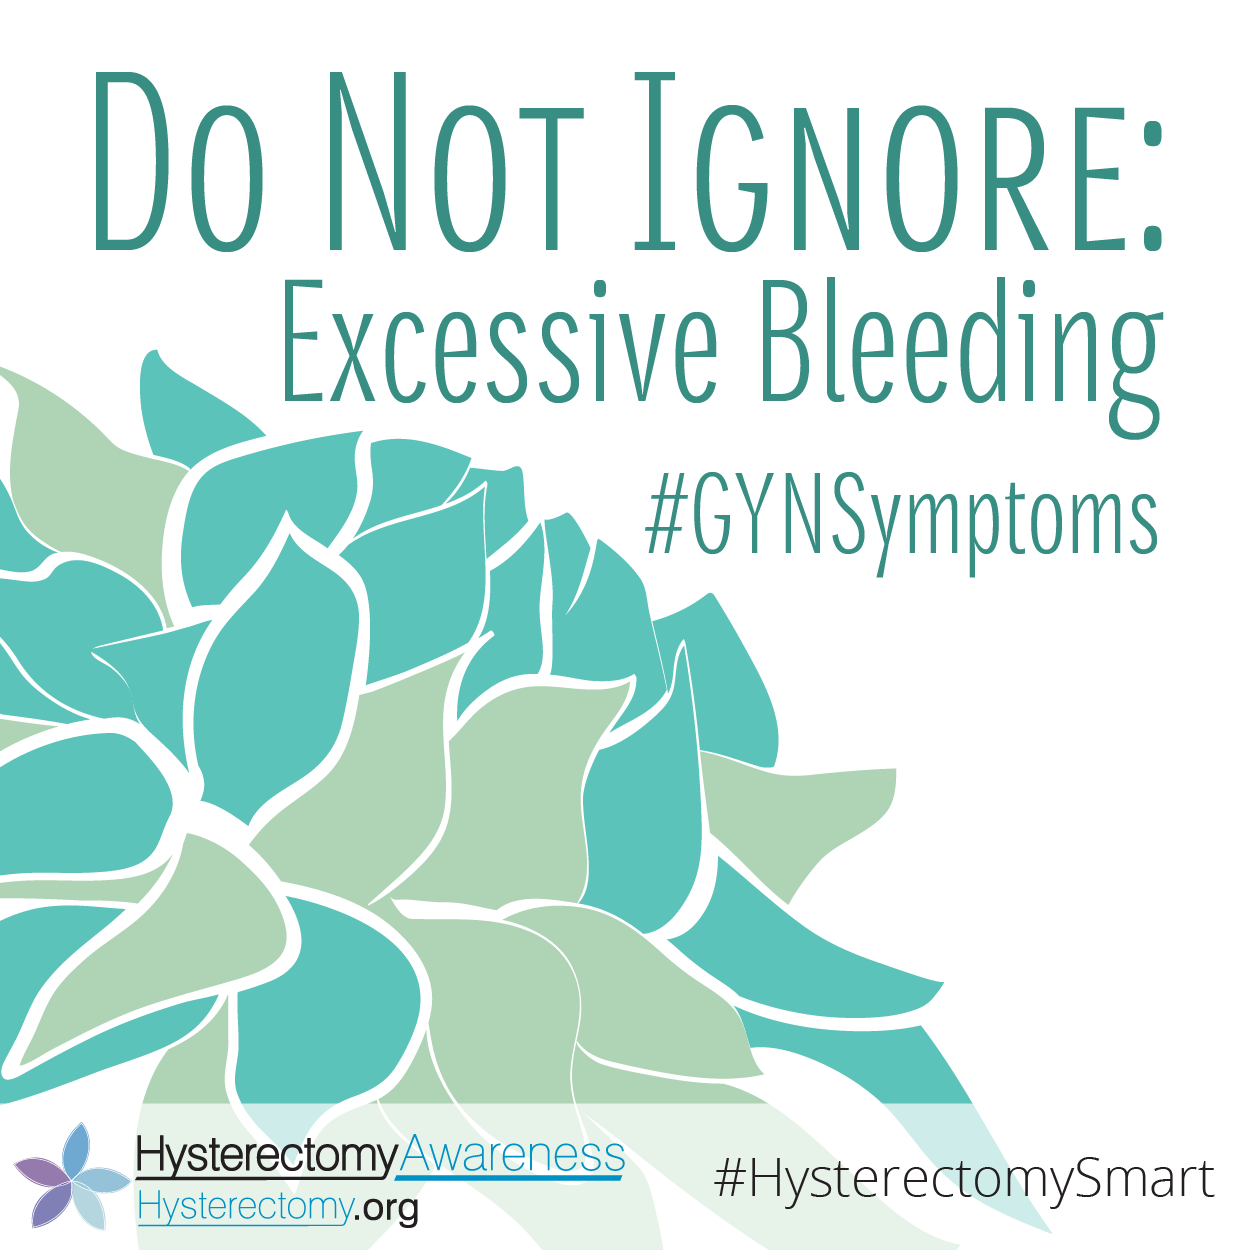 Do Not Ignore: Excessive Bleeding #GYNSymptoms